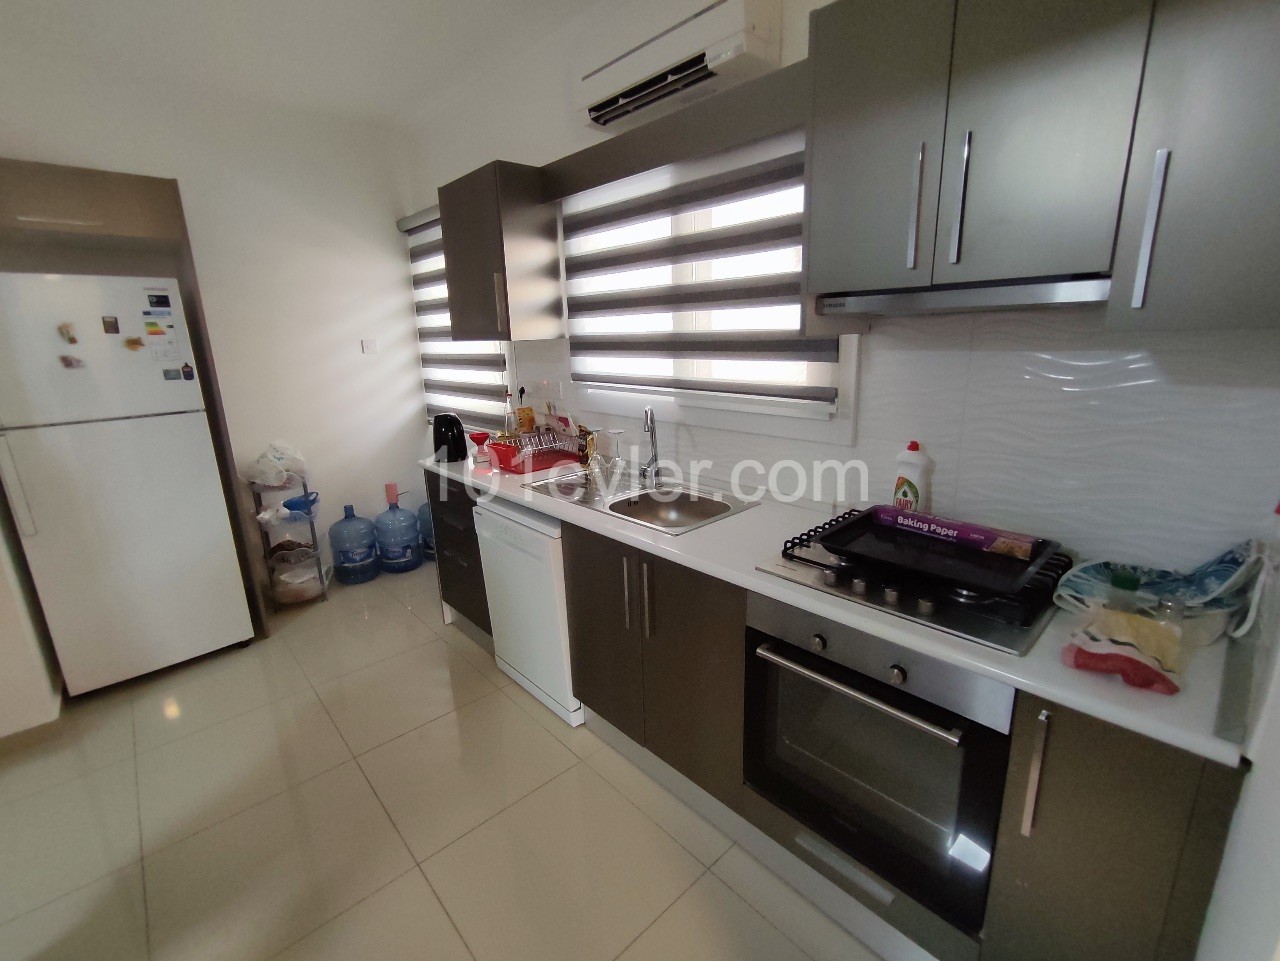 2+1 Apartments for Sale in Kaliland from Ozkaraman ** 